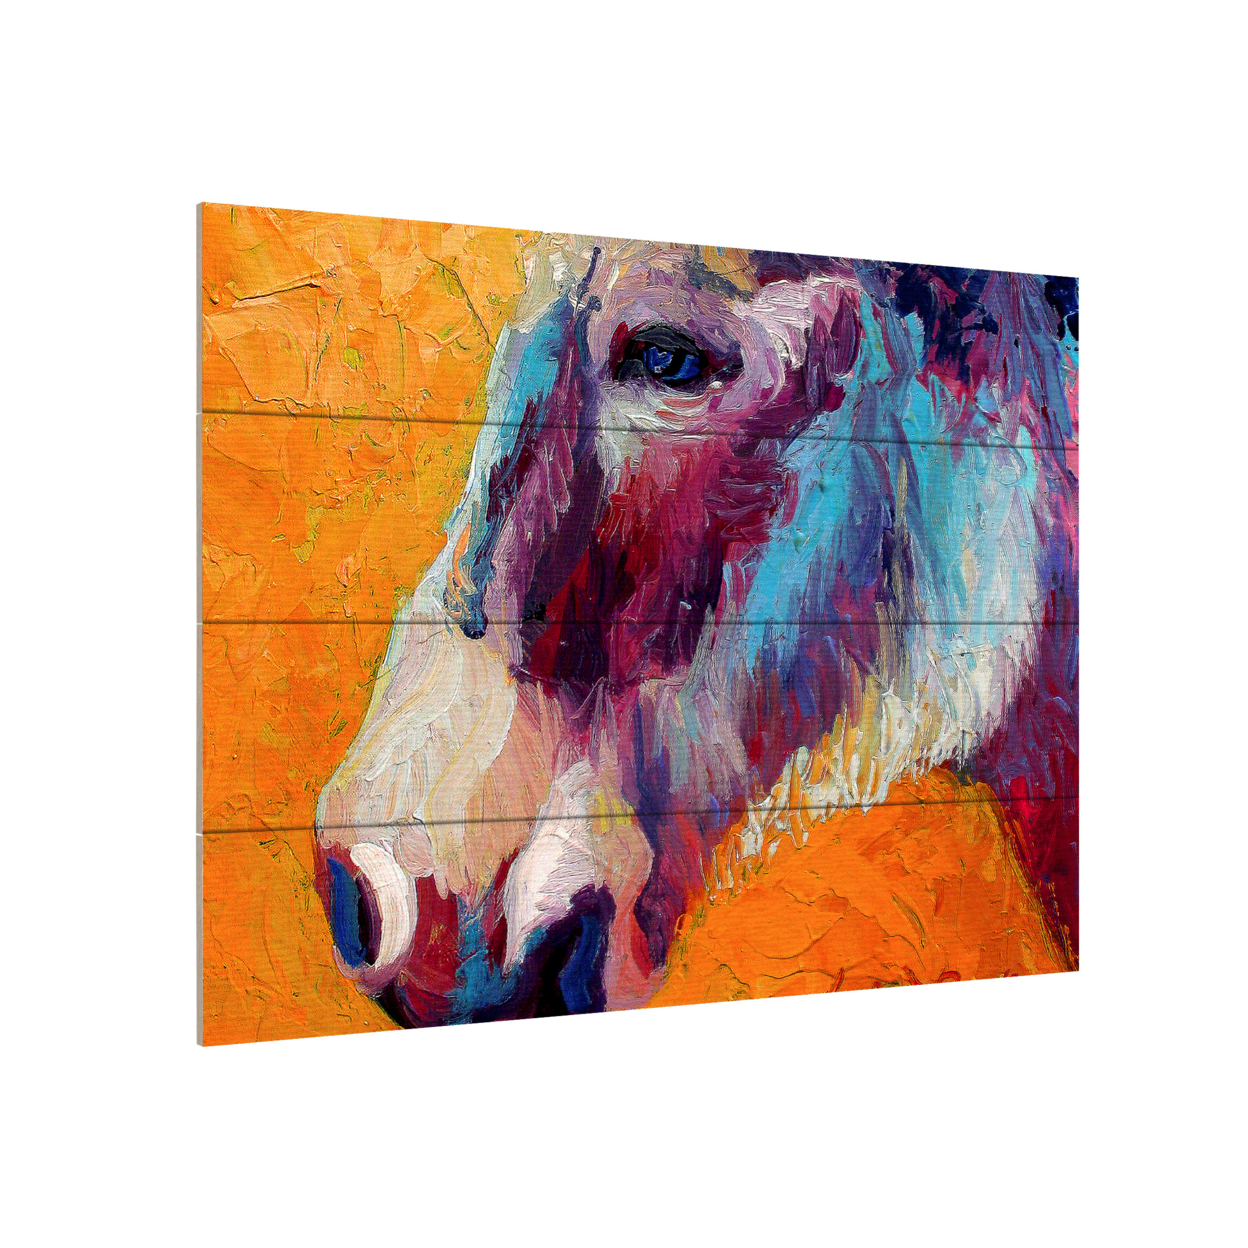 Wall Art 12 X 16 Inches Titled Burro II 1 Ready To Hang Printed On Wooden Planks